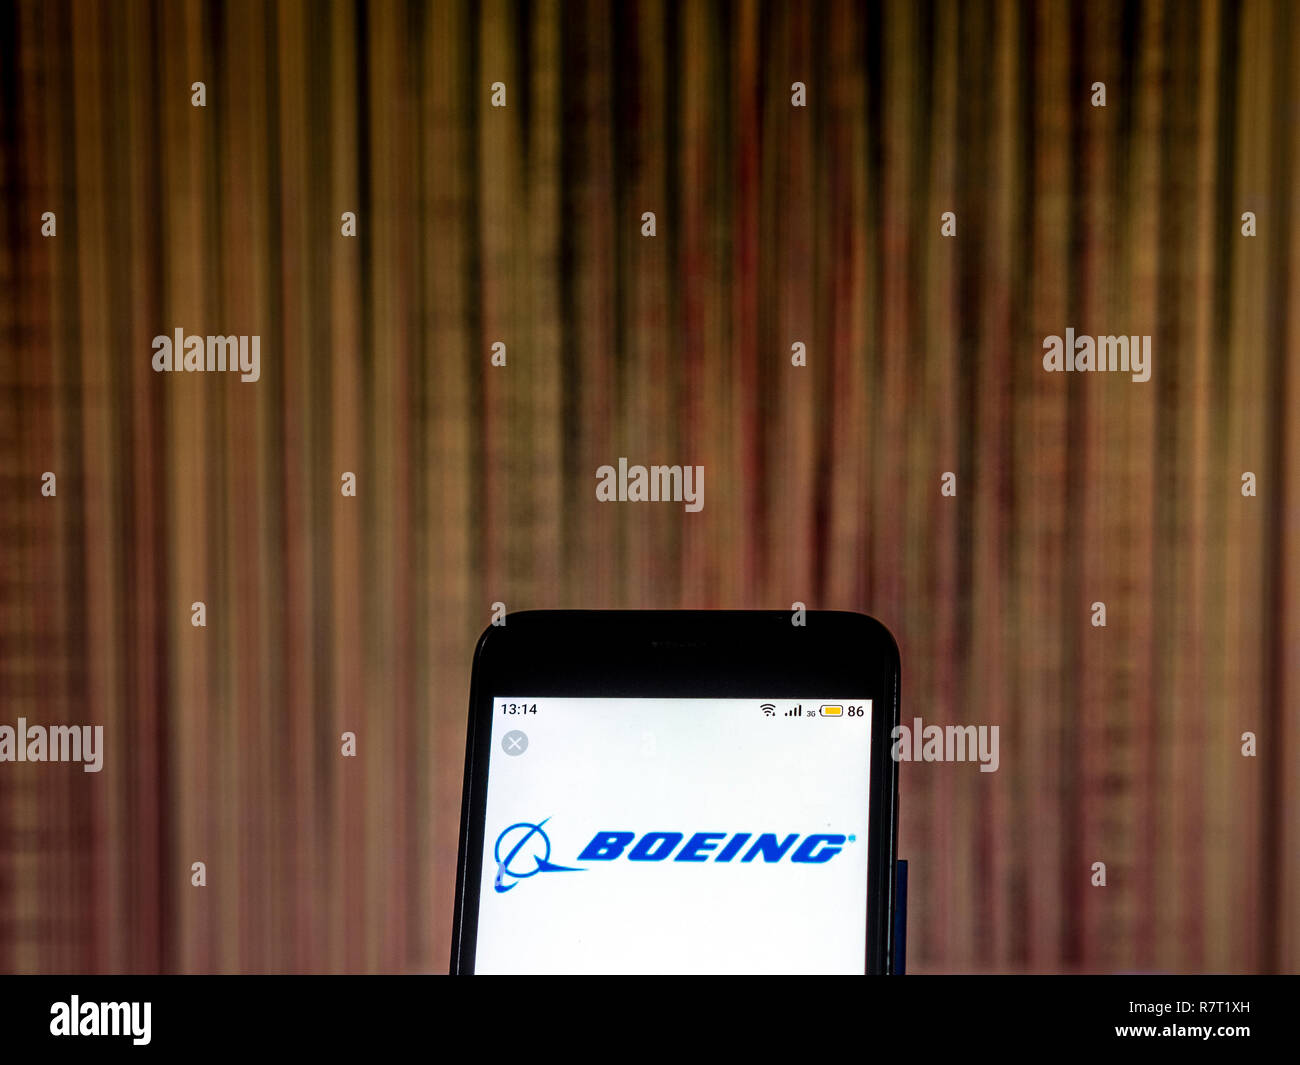 Boeing Aircraft manufacturing company  logo seen displayed on smart phone. Stock Photo